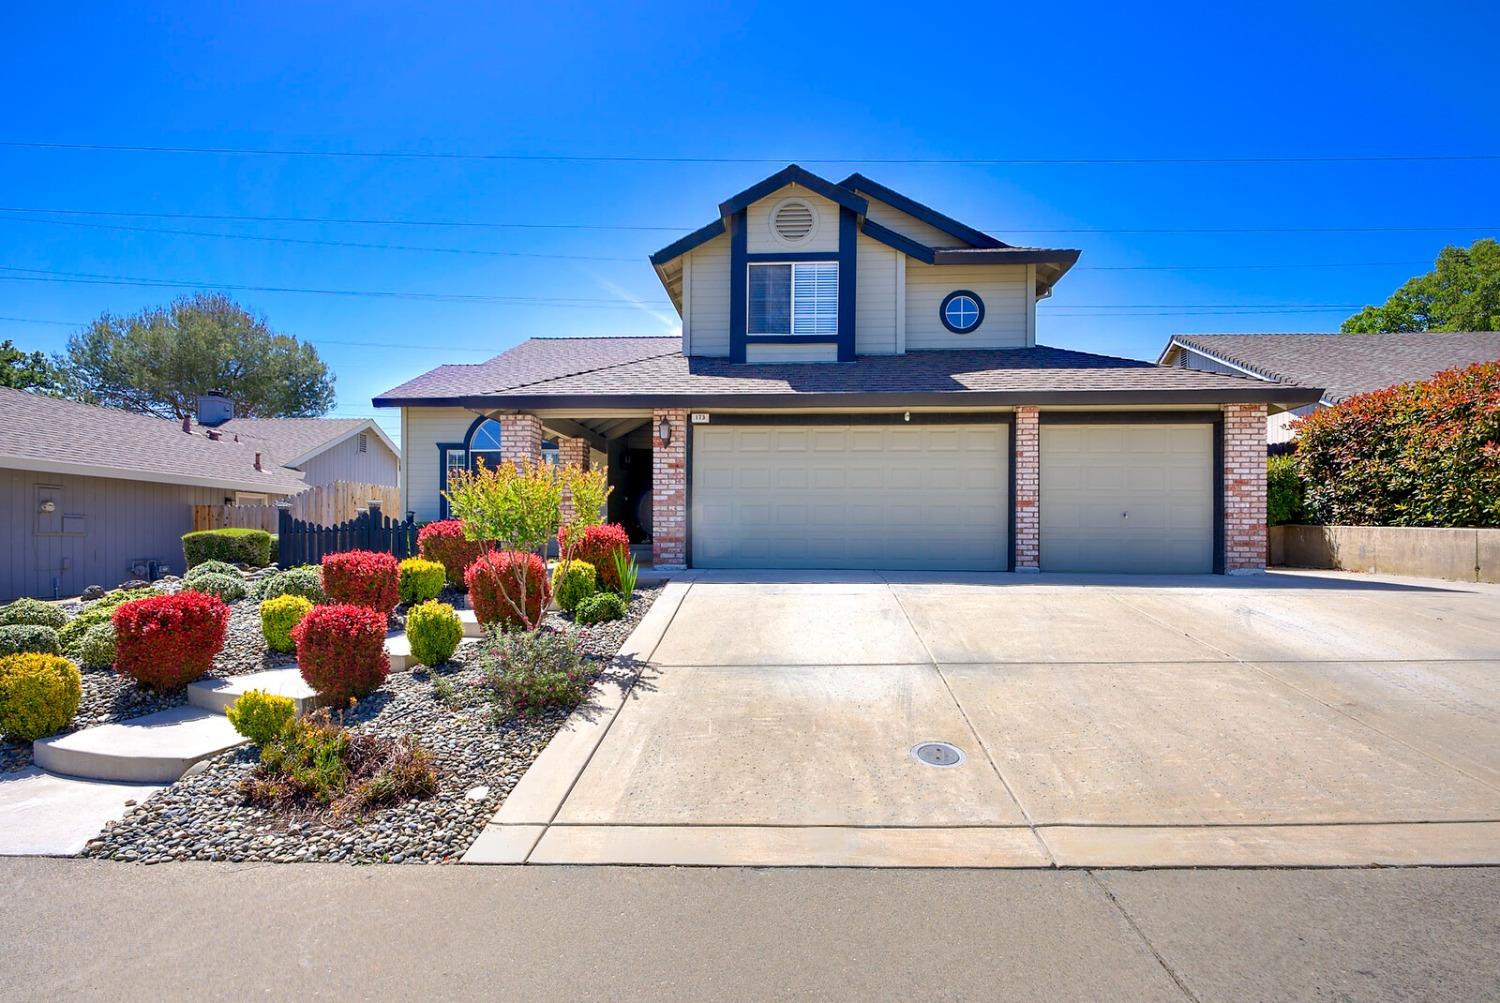 Photo of 173 Livermore Wy in Folsom, CA